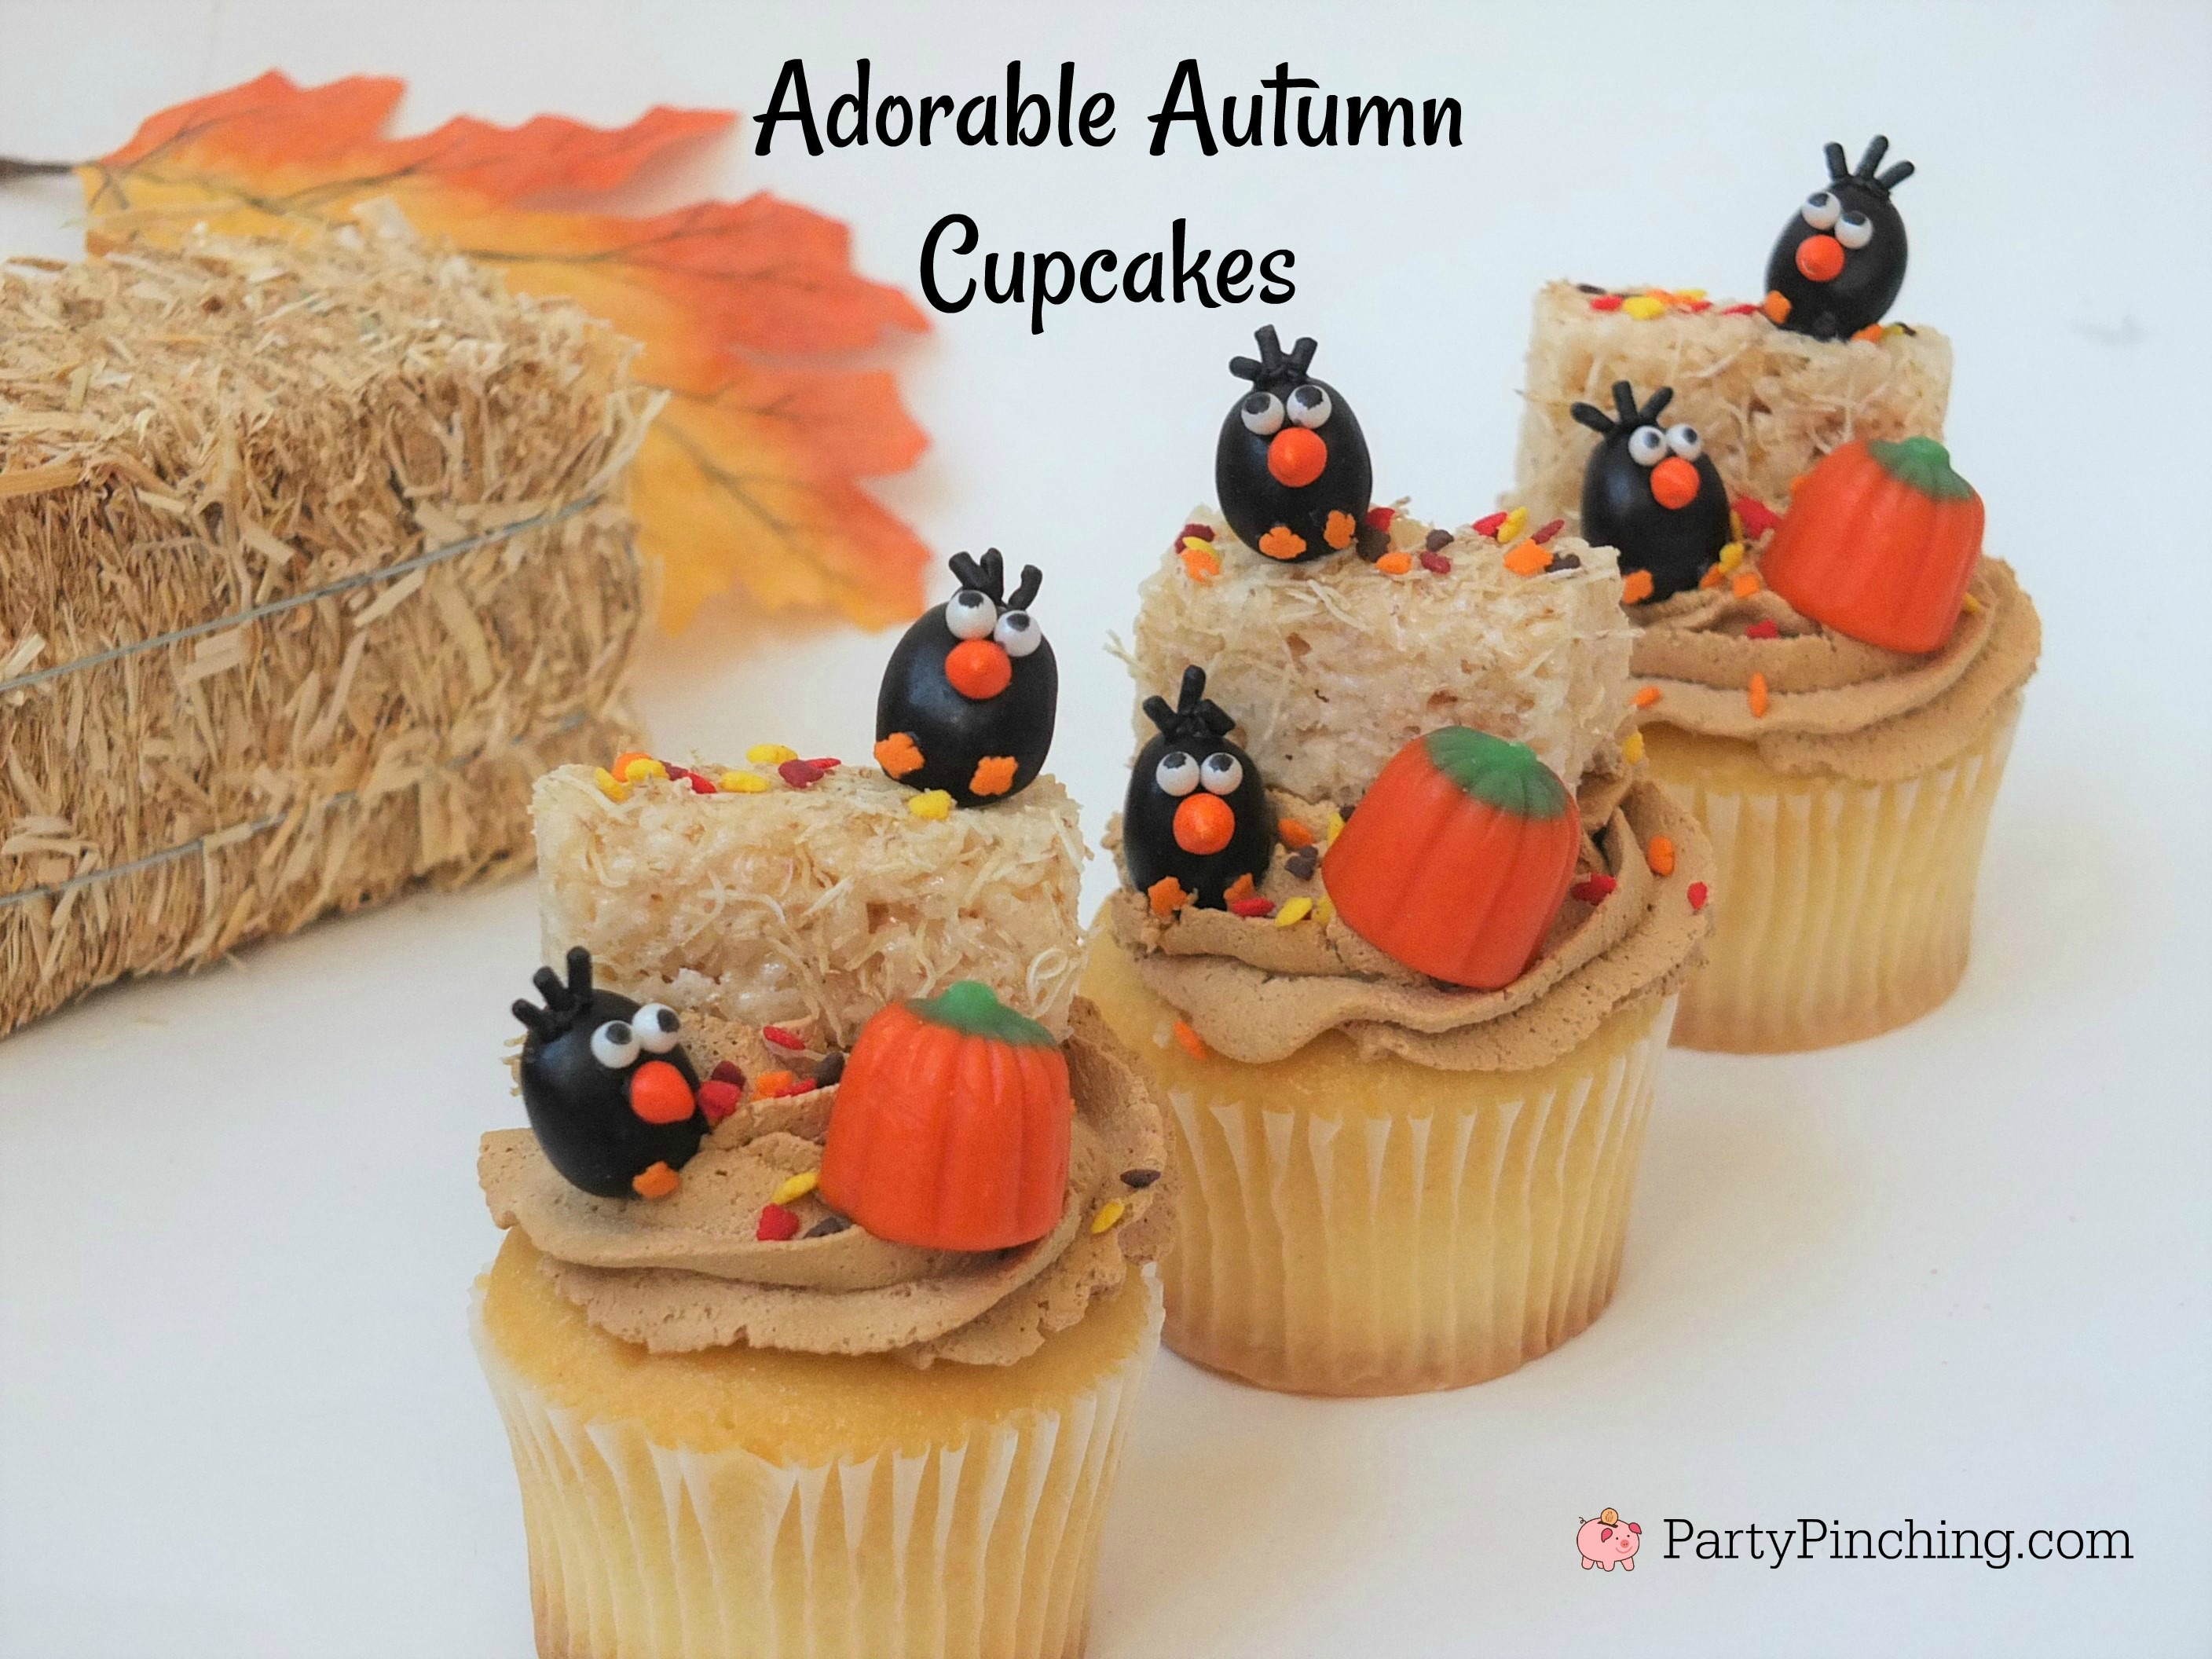 crow cupcakes, adorable autumn fall cupcakes, jelly bean crows, cute food, fun food for kids, hay bale cupcakes rice krispie haybales with leaf sprinkles, ask for whipped, caramel whipped icing frosting